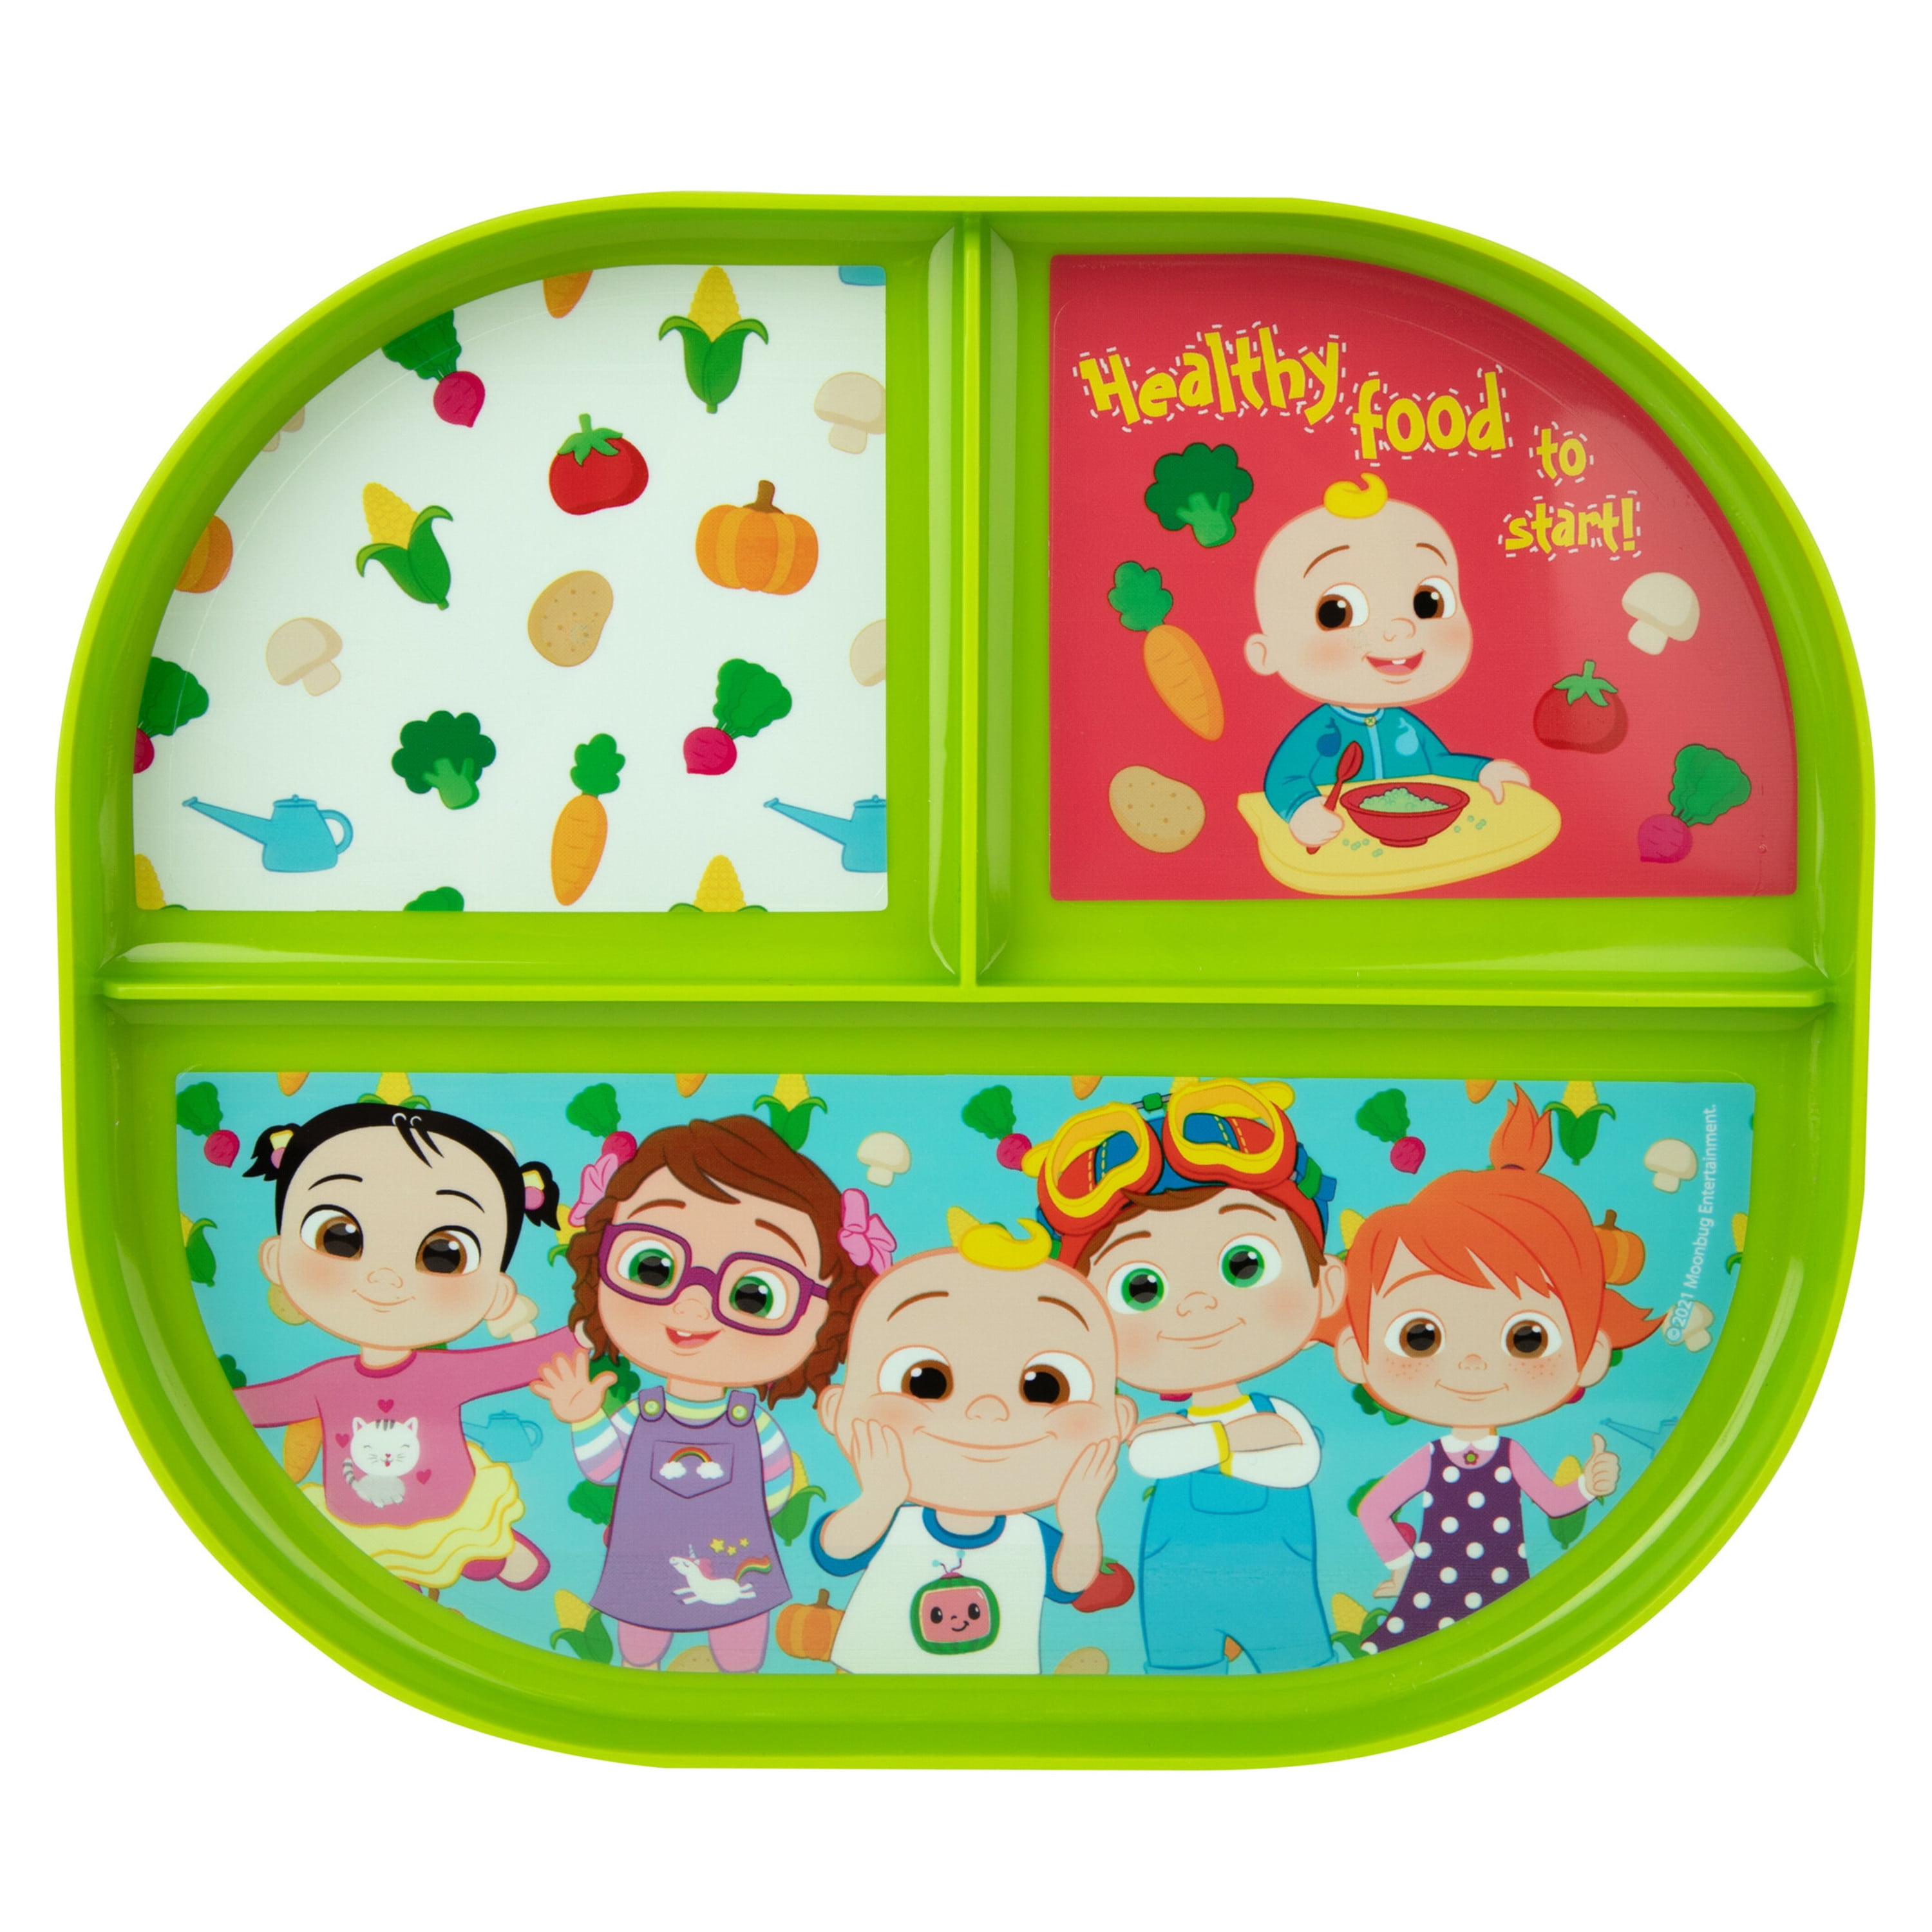 Cocomelon Lunch Box for School Kids Cute Cartoon Toddler Gift